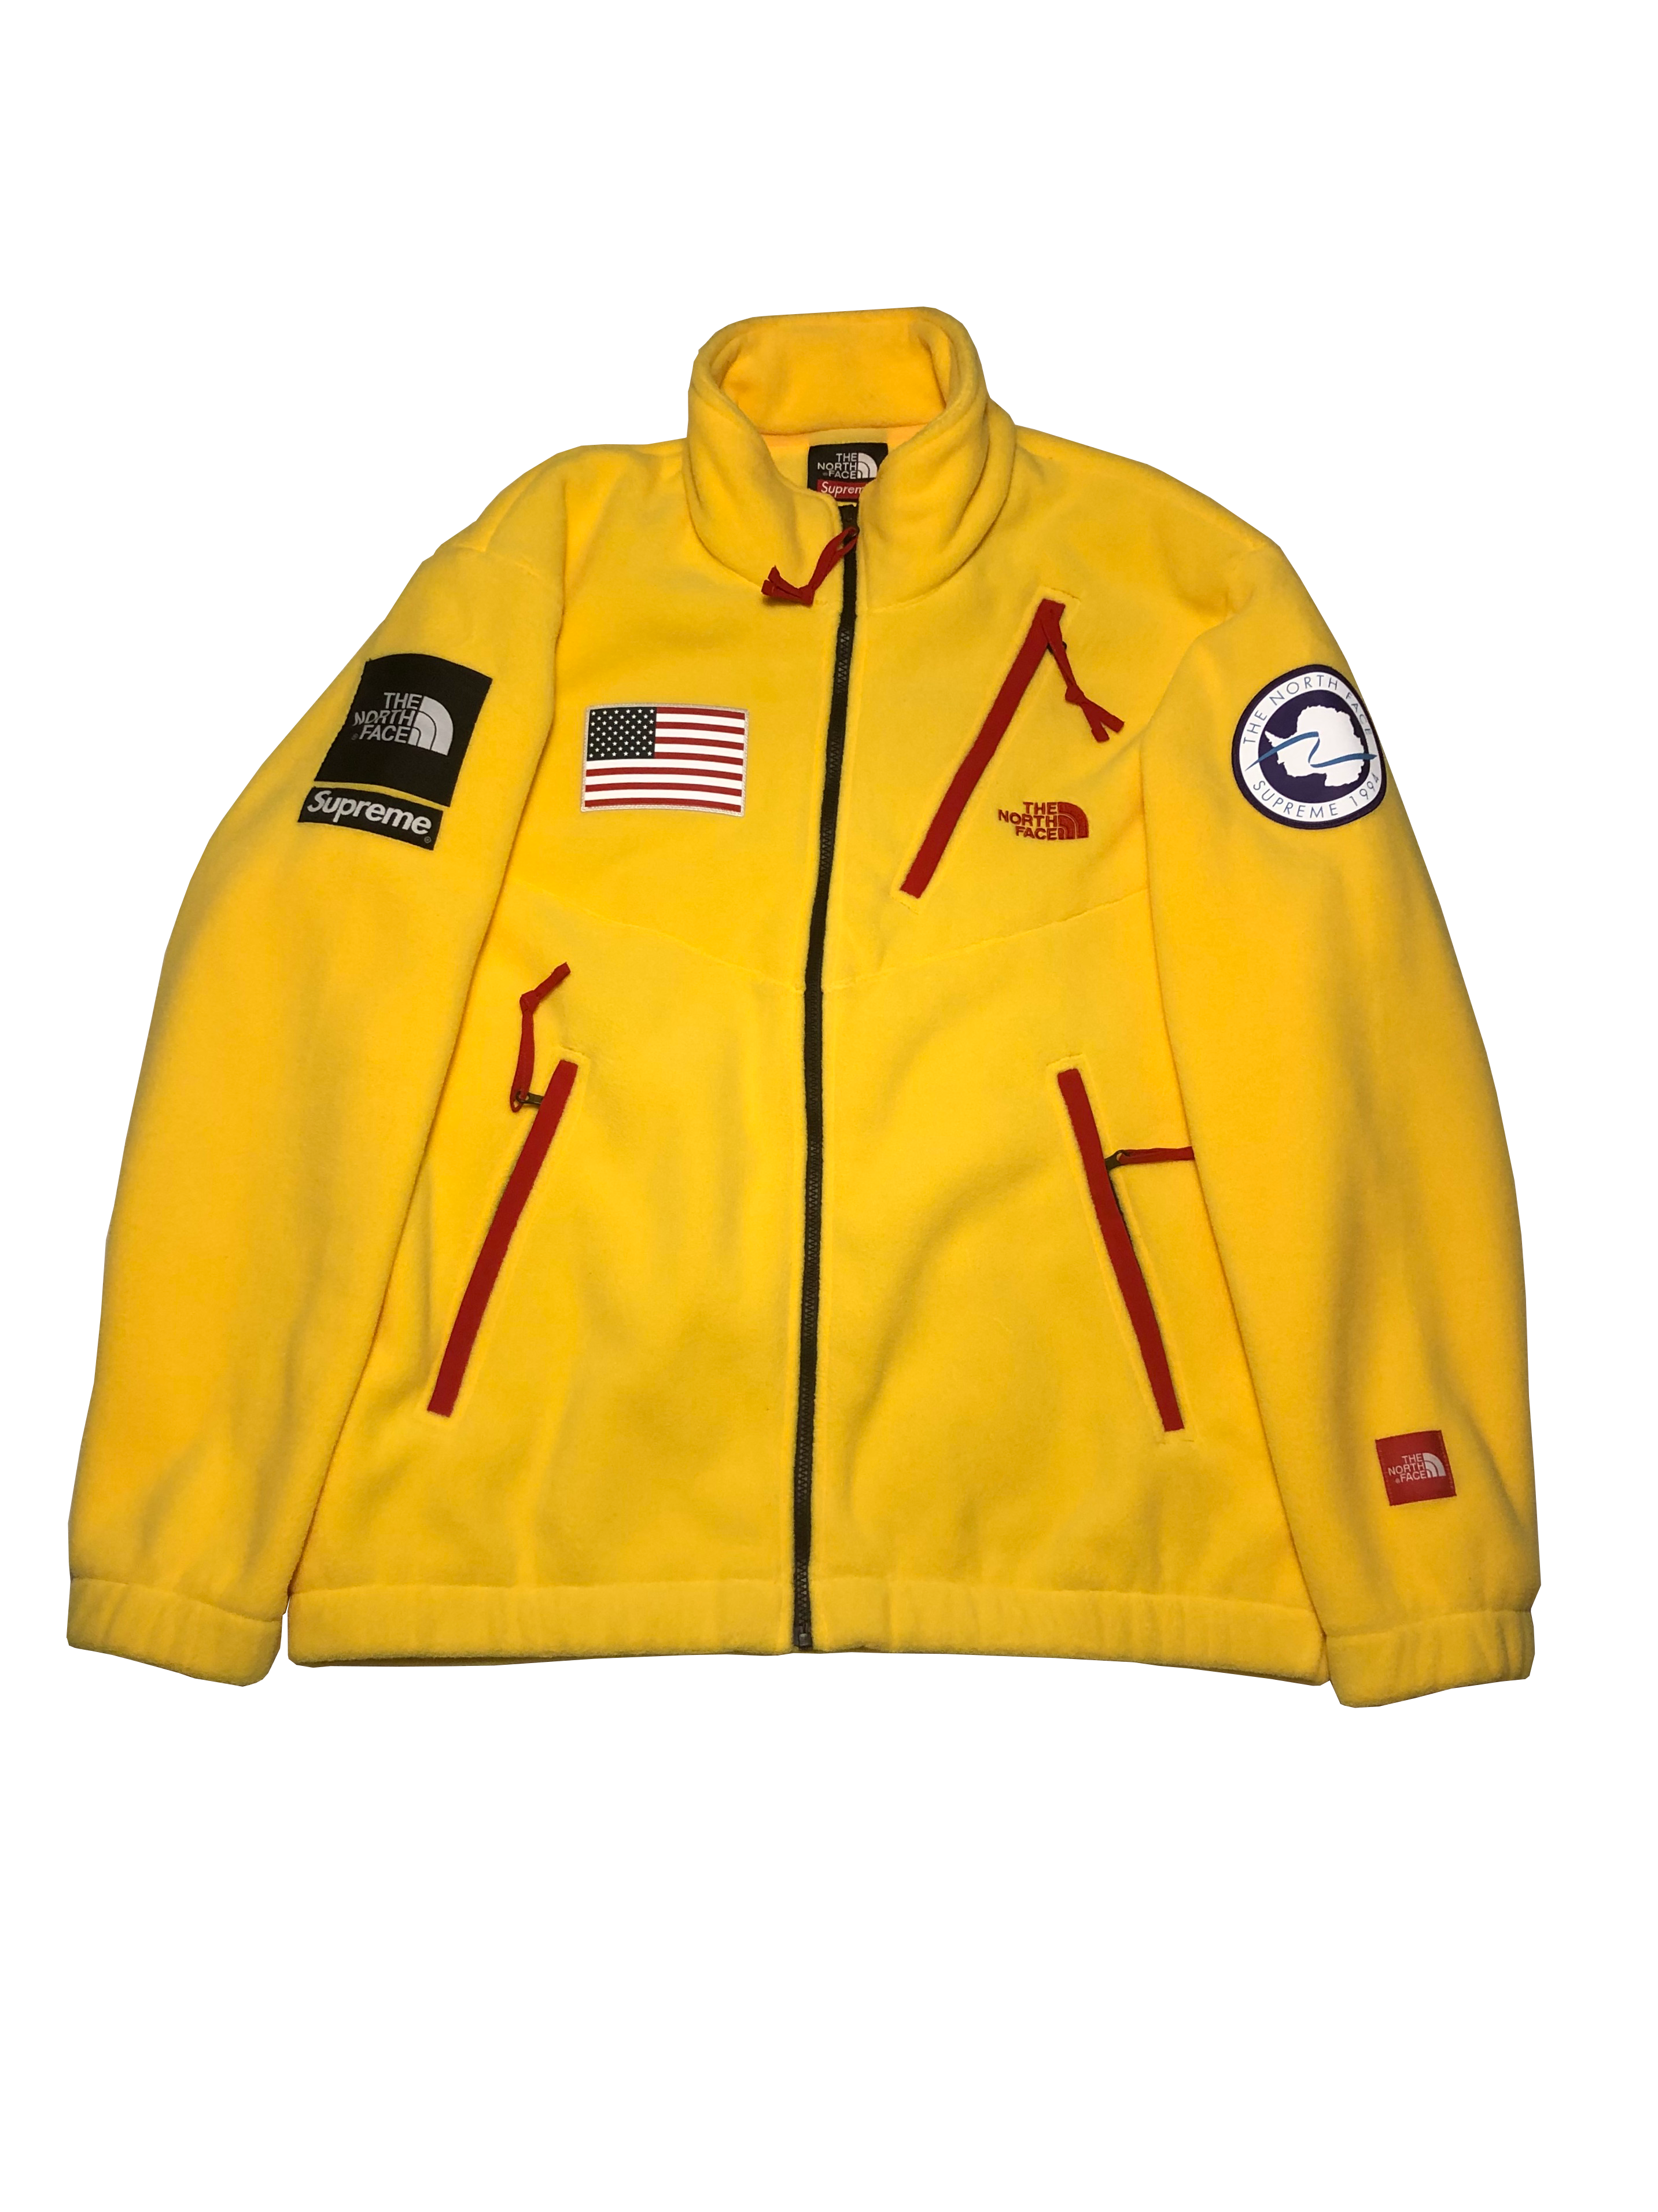 north face antarctic expedition jacket